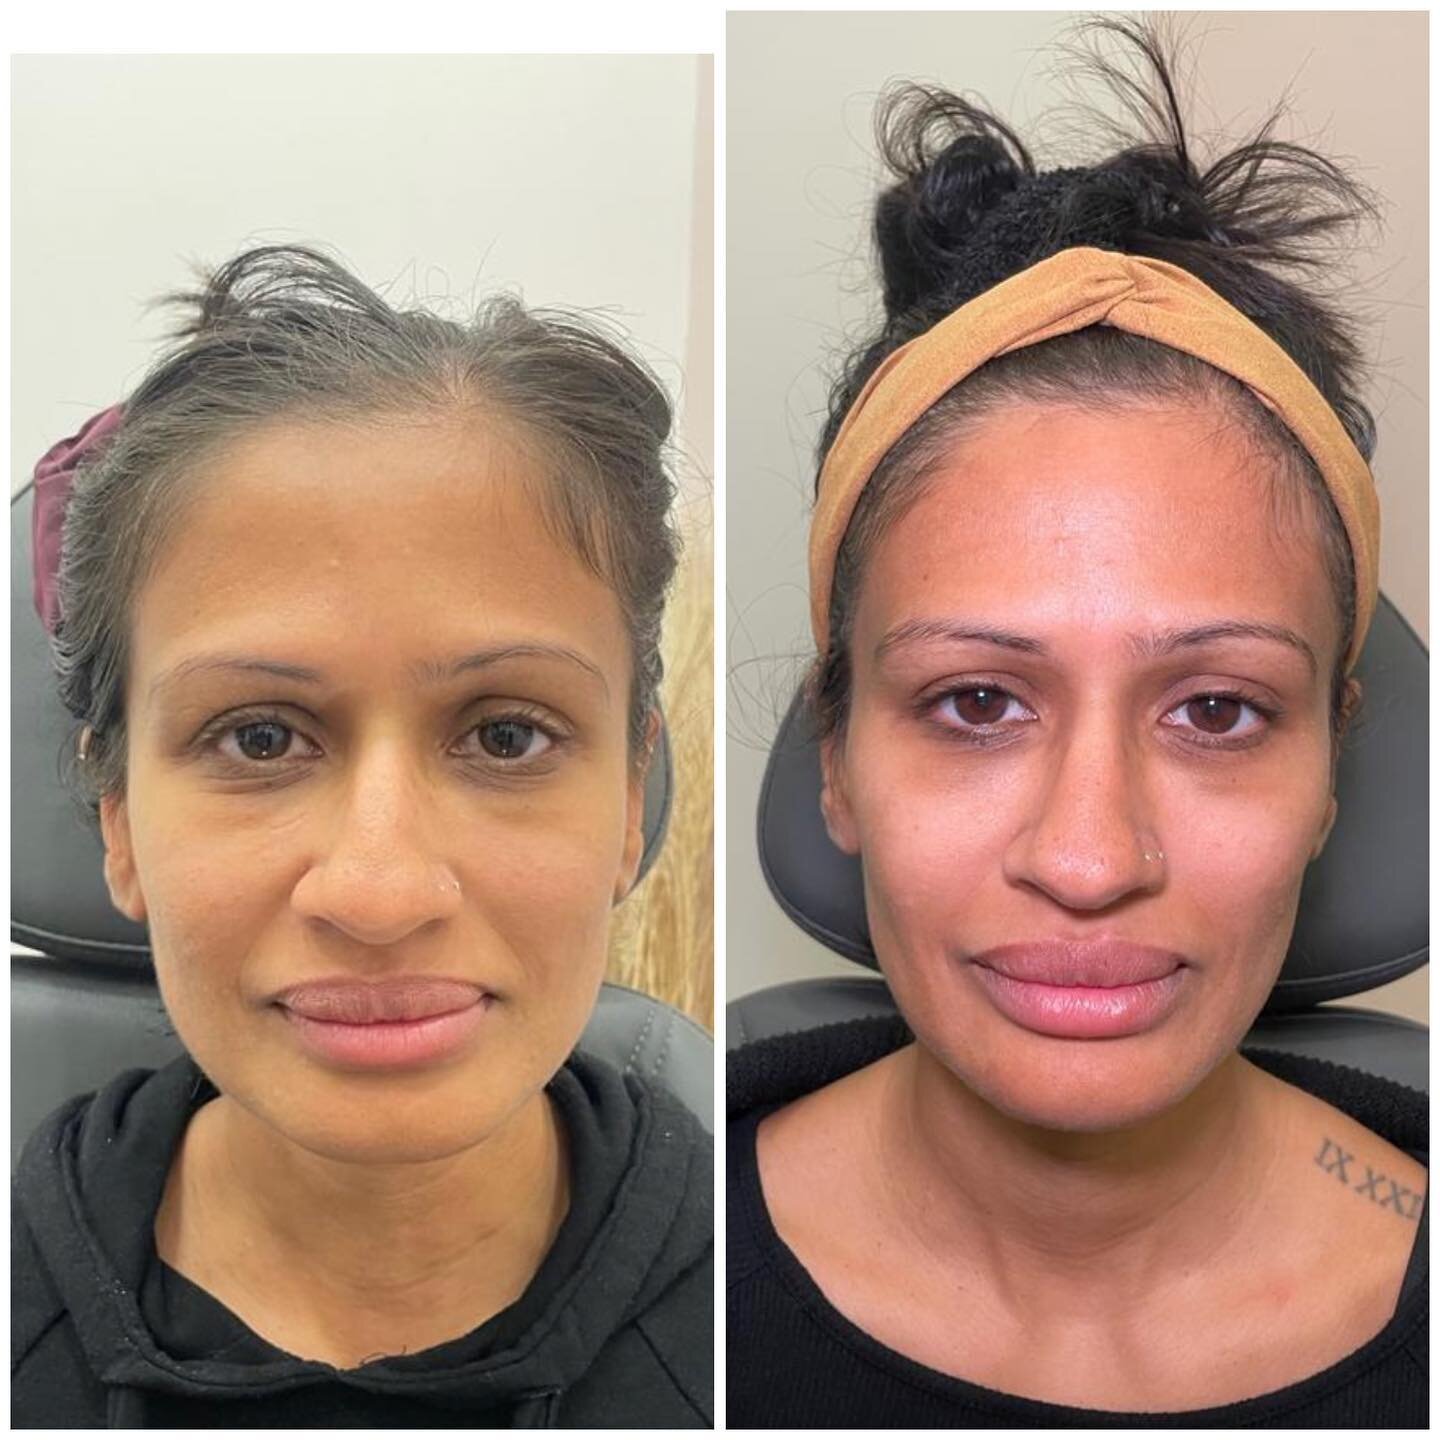 This happy client regained a youthful glow with undetectable dermal fillers in her cheeks, chin and a mini filler hydration for her lips. Best part is that fillers can help you achieve symmetrical contours naturally when done by skilled professionals